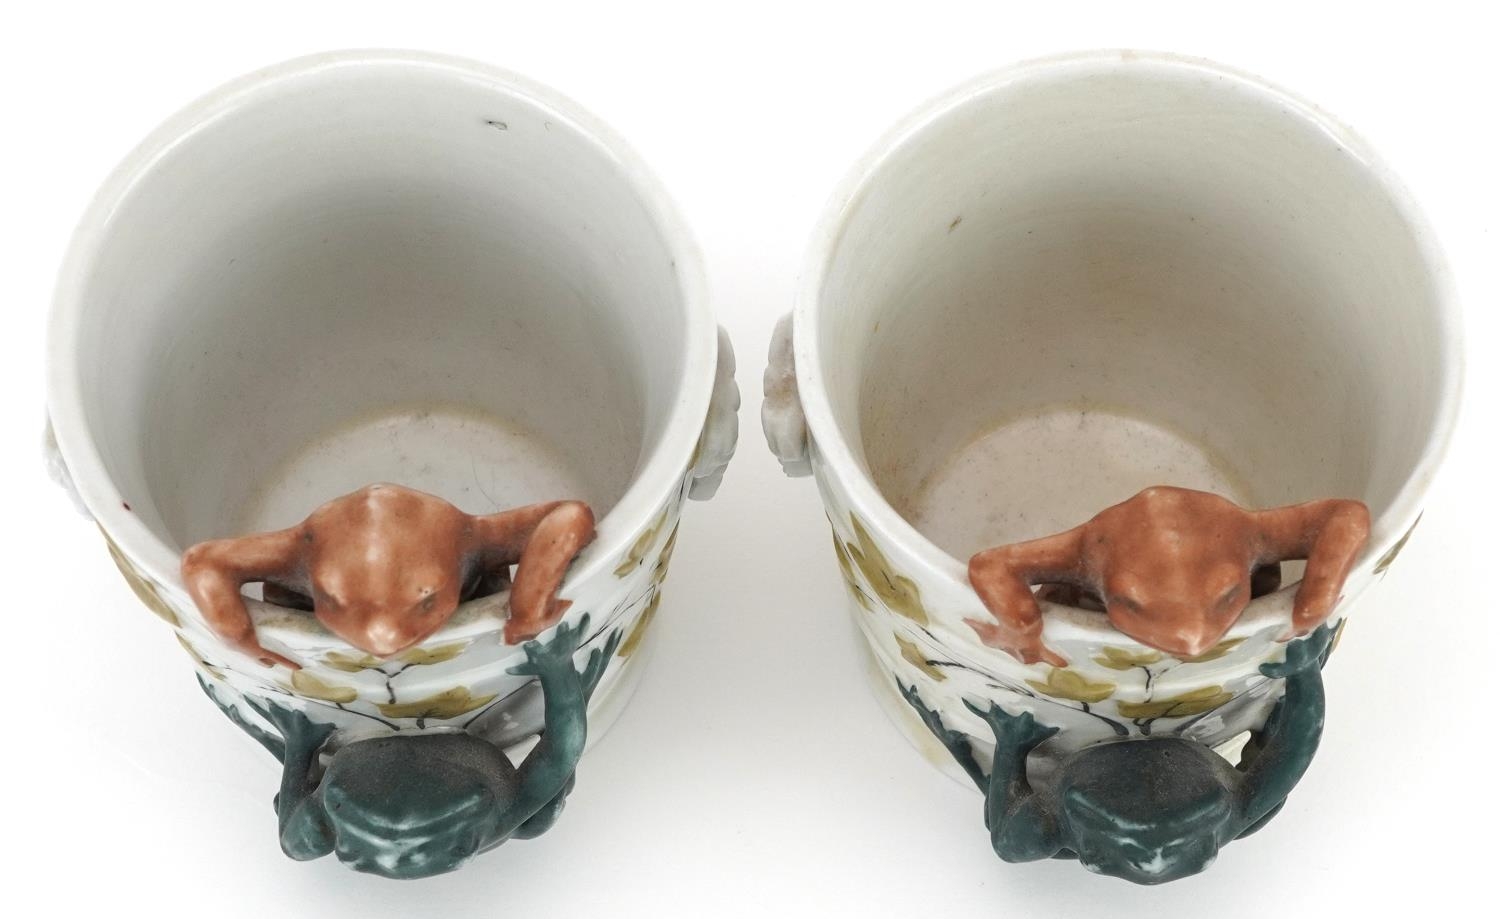 Pair of 19th century continental porcelain comical cache pots in the form of buckets mounted with - Image 2 of 4